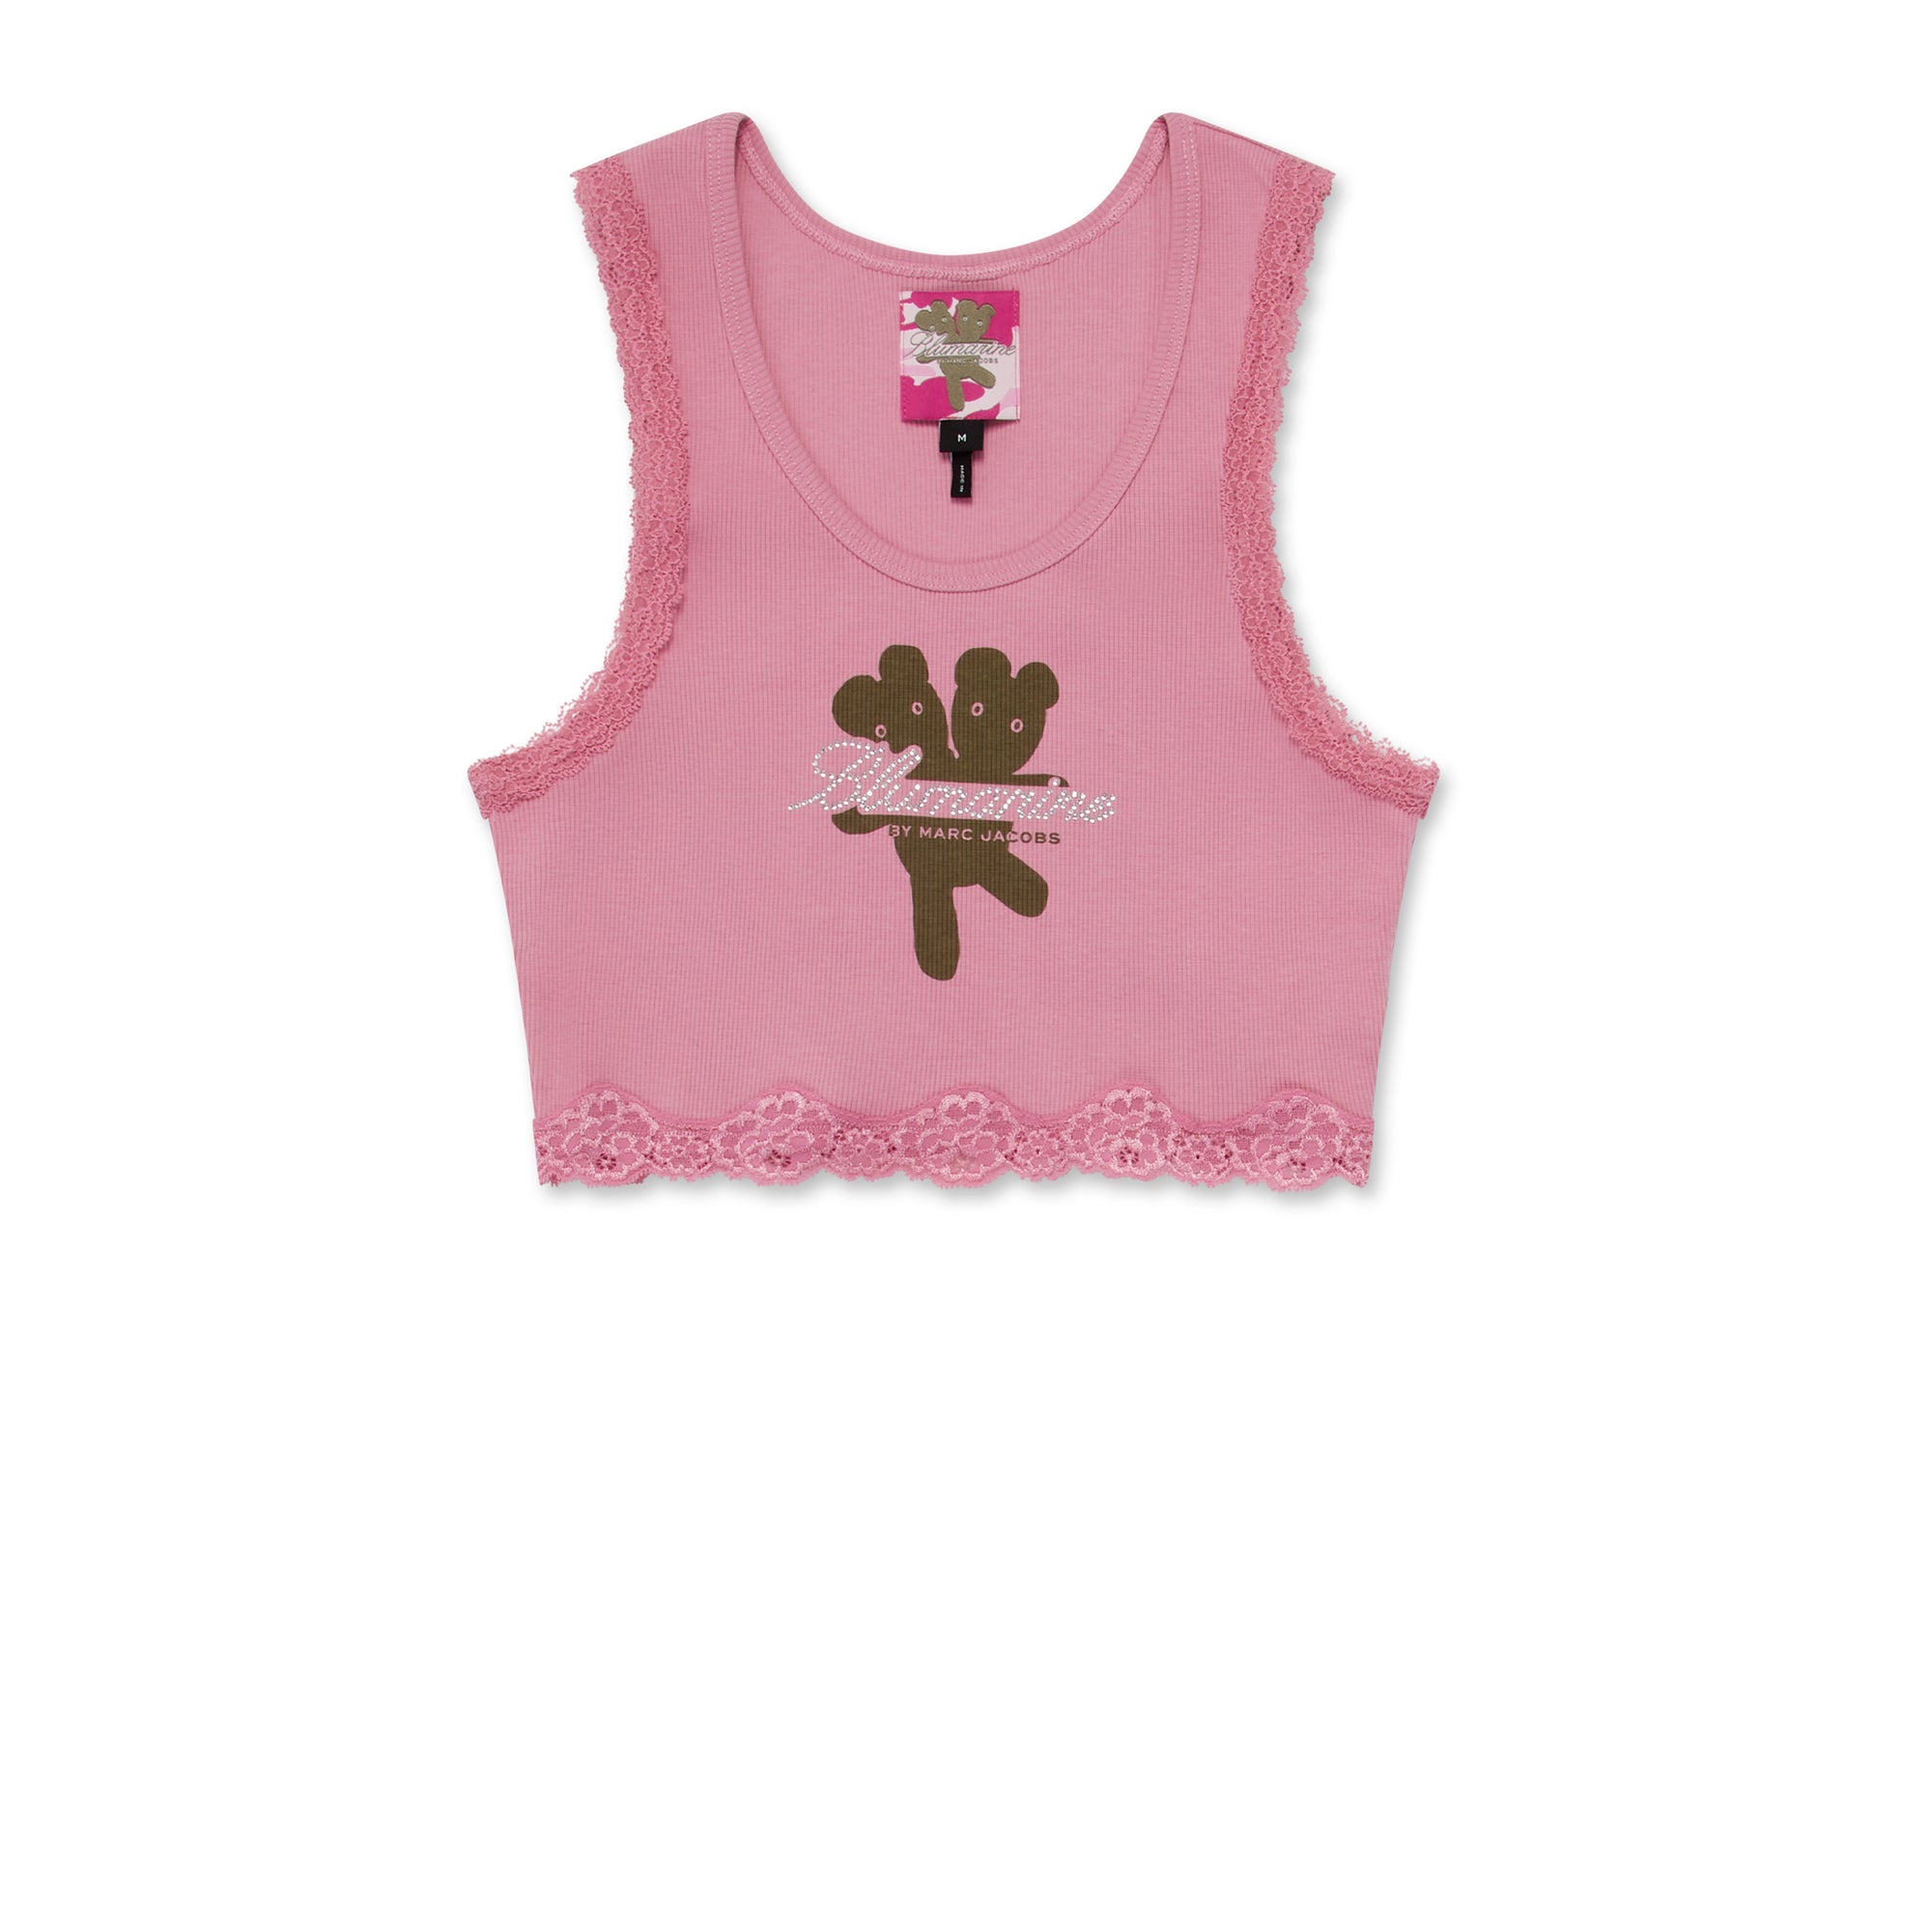 Blumarine by Marc Jacobs - Women’s Crop Graphic Lace Tank - (Pink) view 1